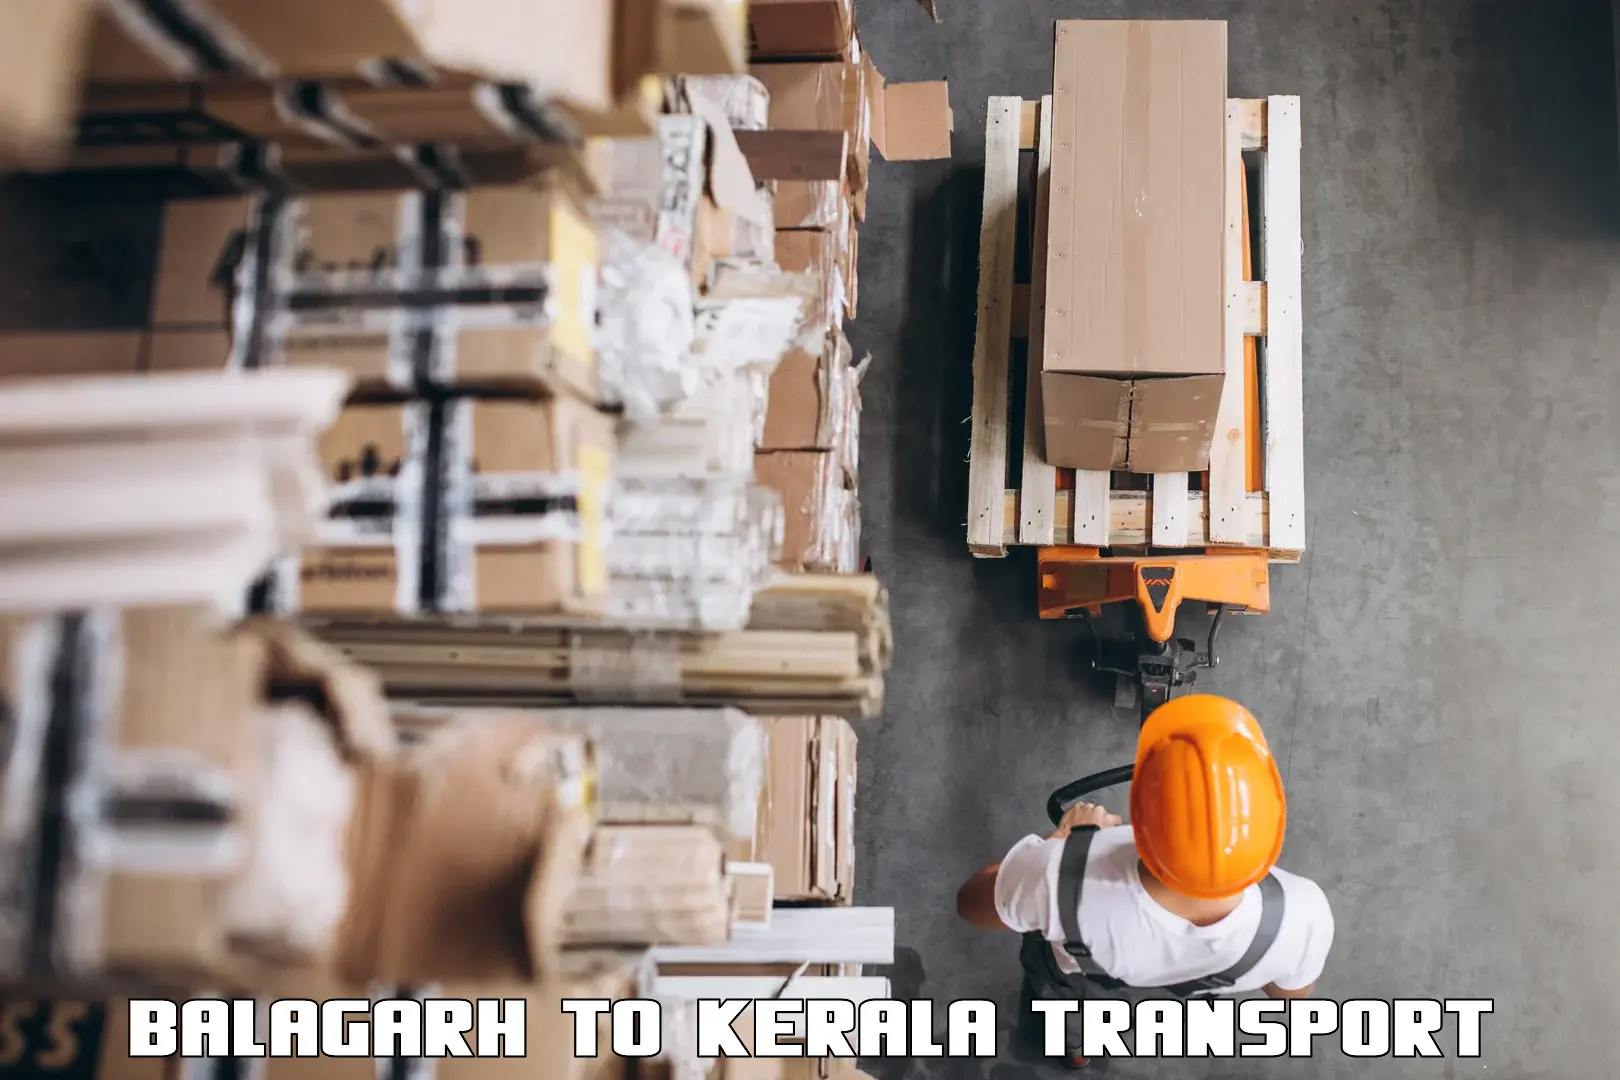 Luggage transport services Balagarh to Cochin University of Science and Technology